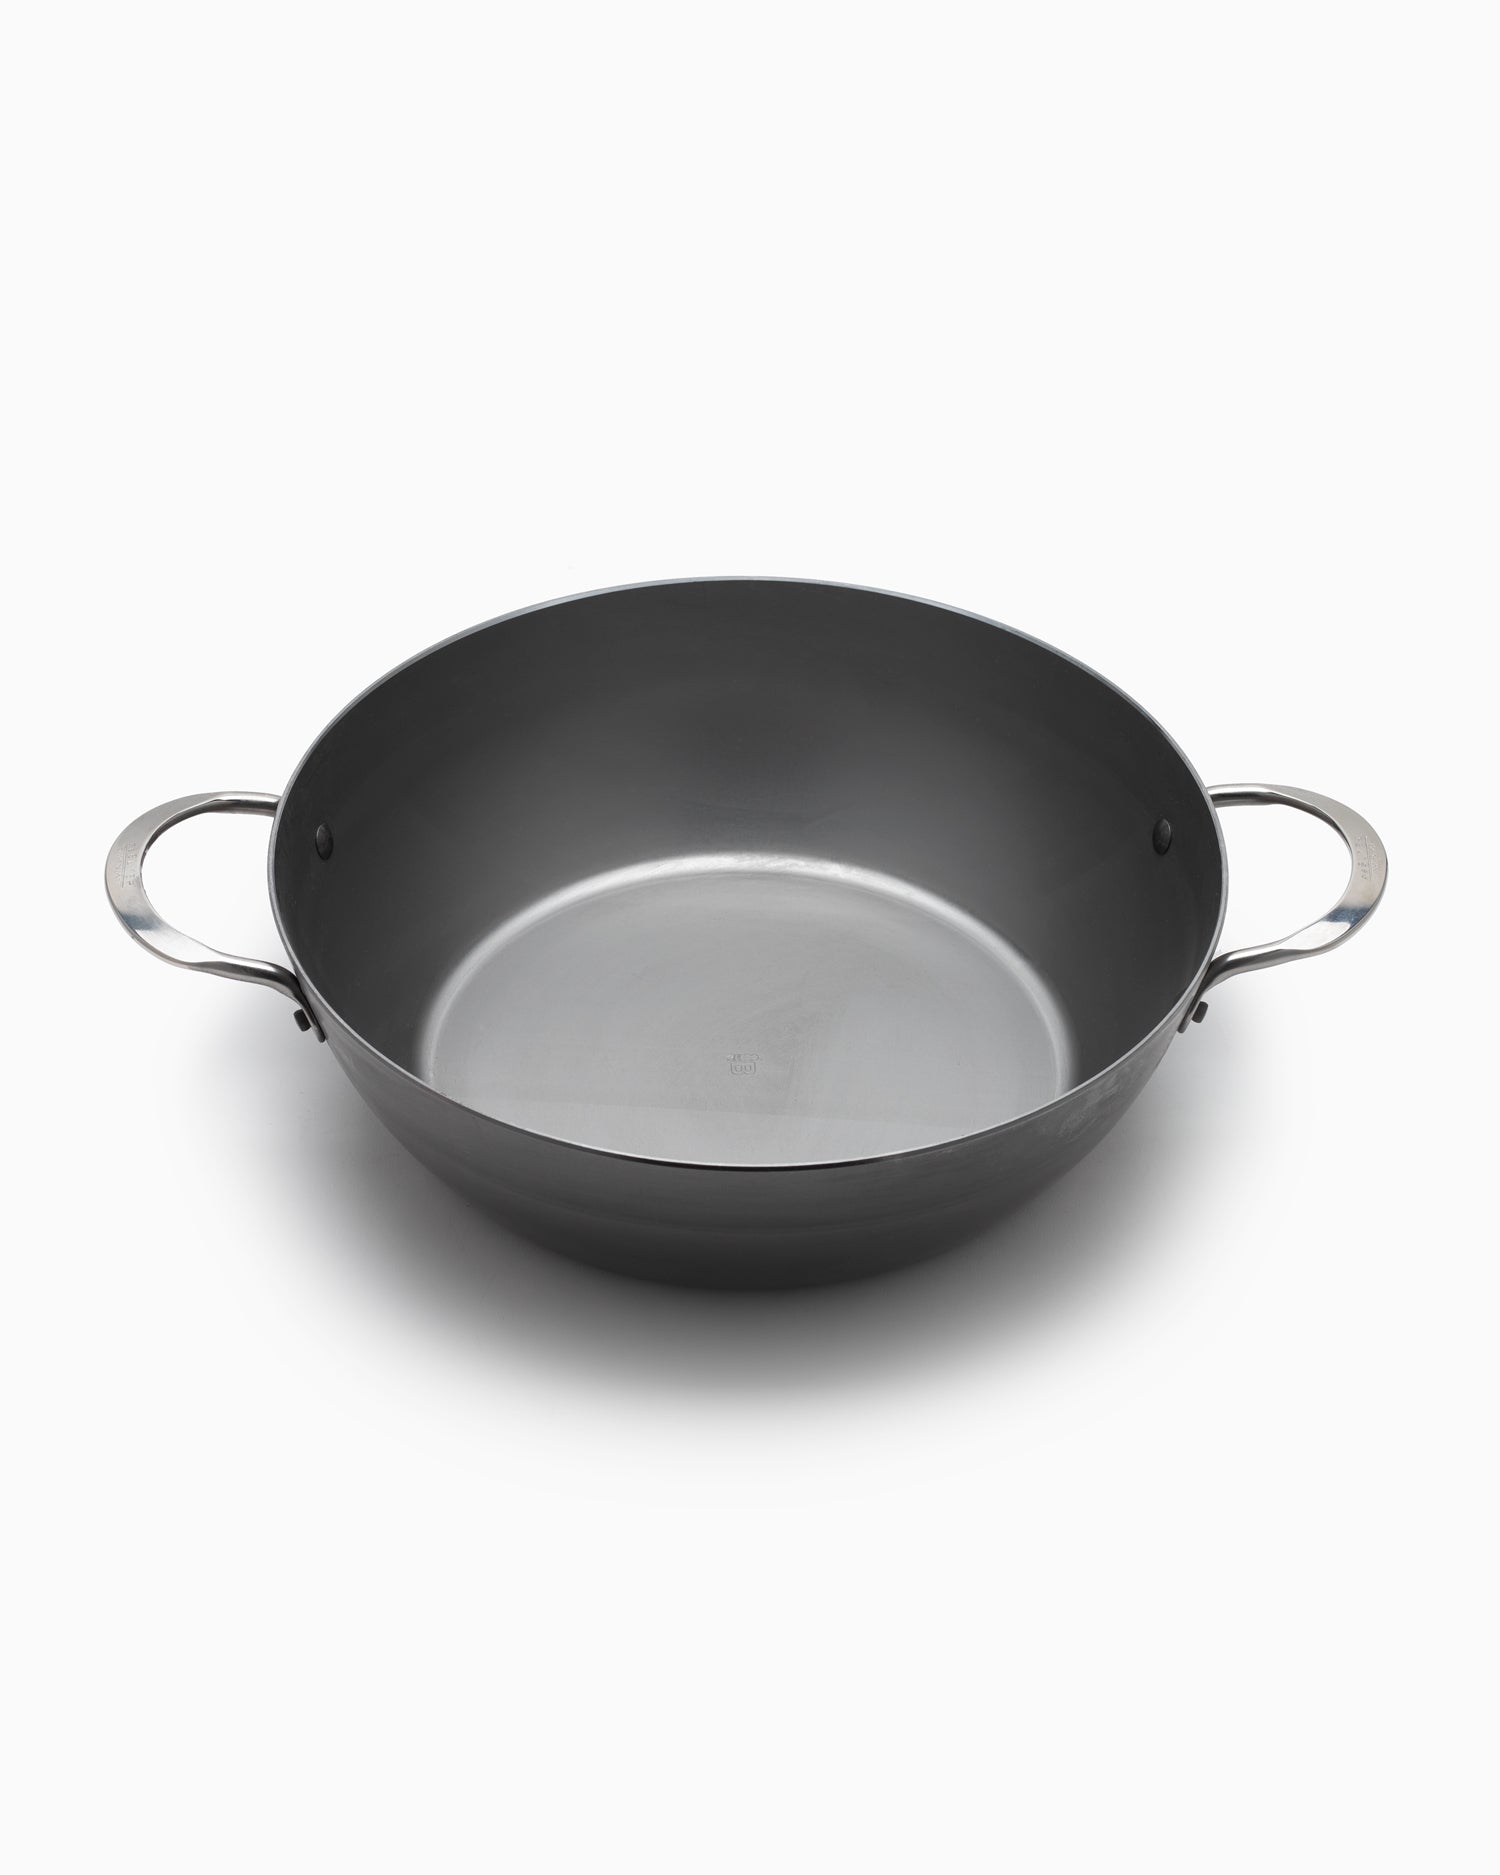 de Buyer 32cm Mineral B Two Handled Country Frying Pan